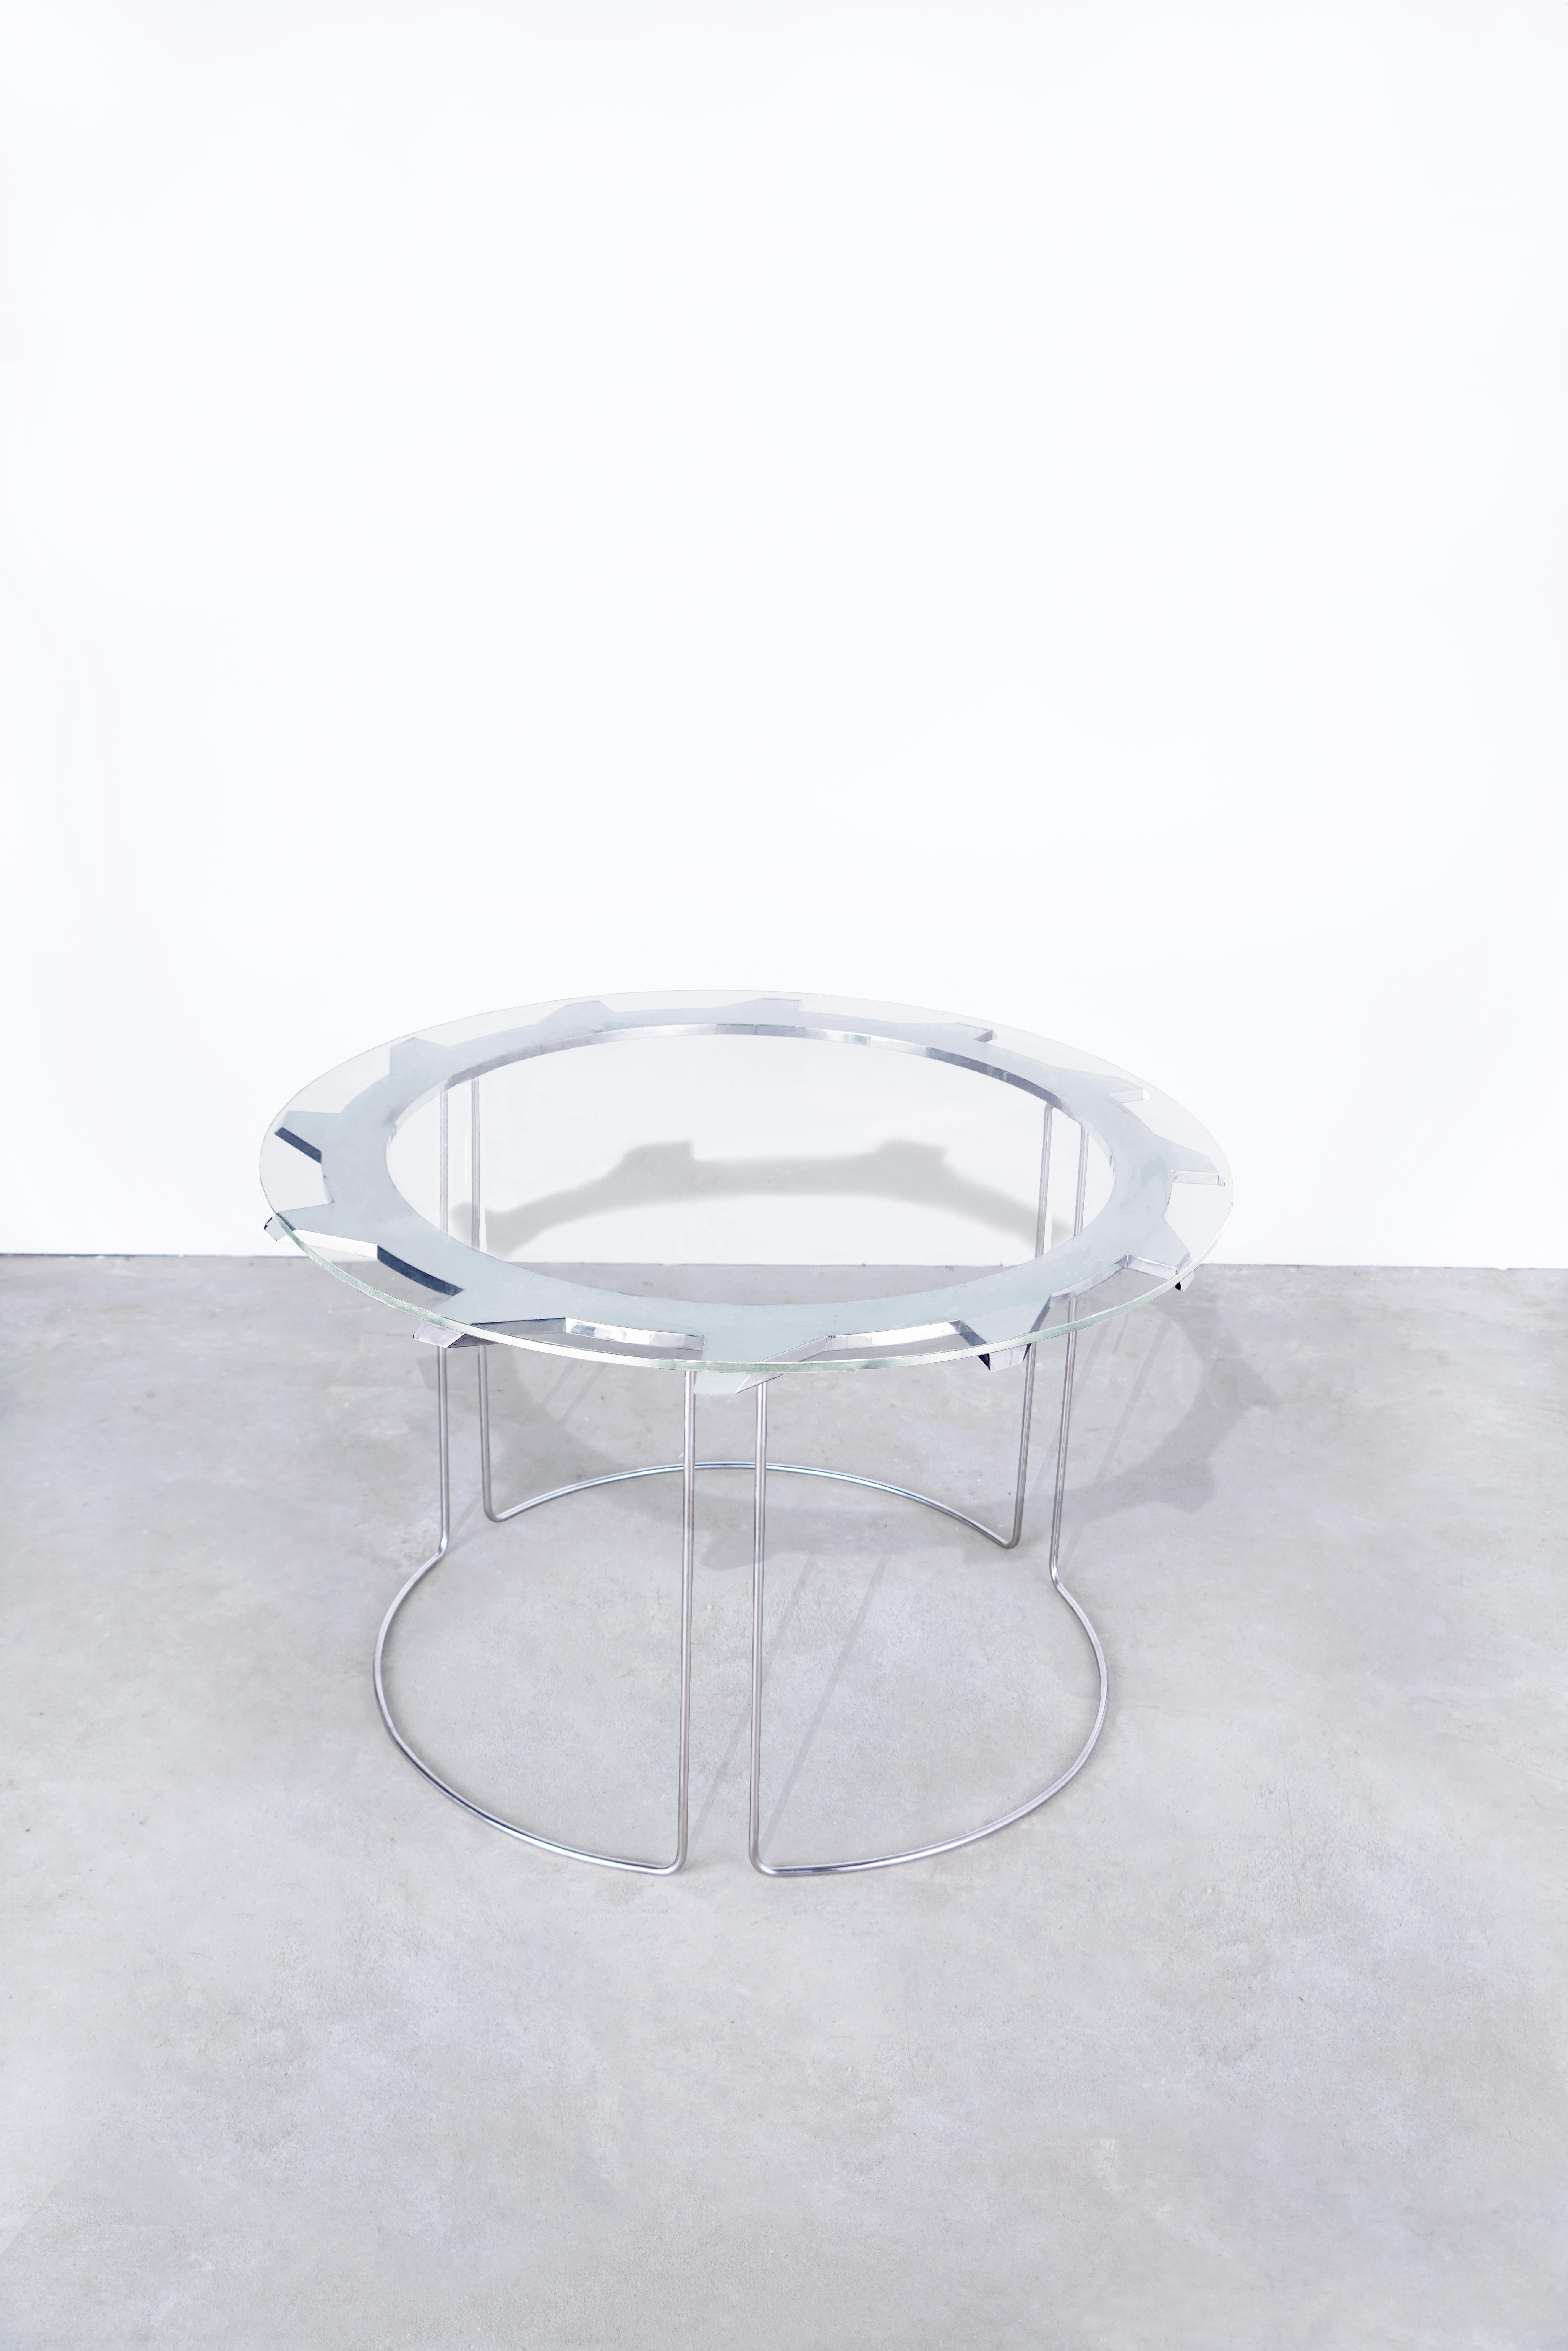 DESCRIPTION
Water jet cut + beveled, aerospace-grade aluminum. 
Hand-formed, with hand-polished stainless steel legs, welded into one continuous table base.
Starphire glass top. 
Position alone, or nest with another buzzsaw table, or buzzsaw end